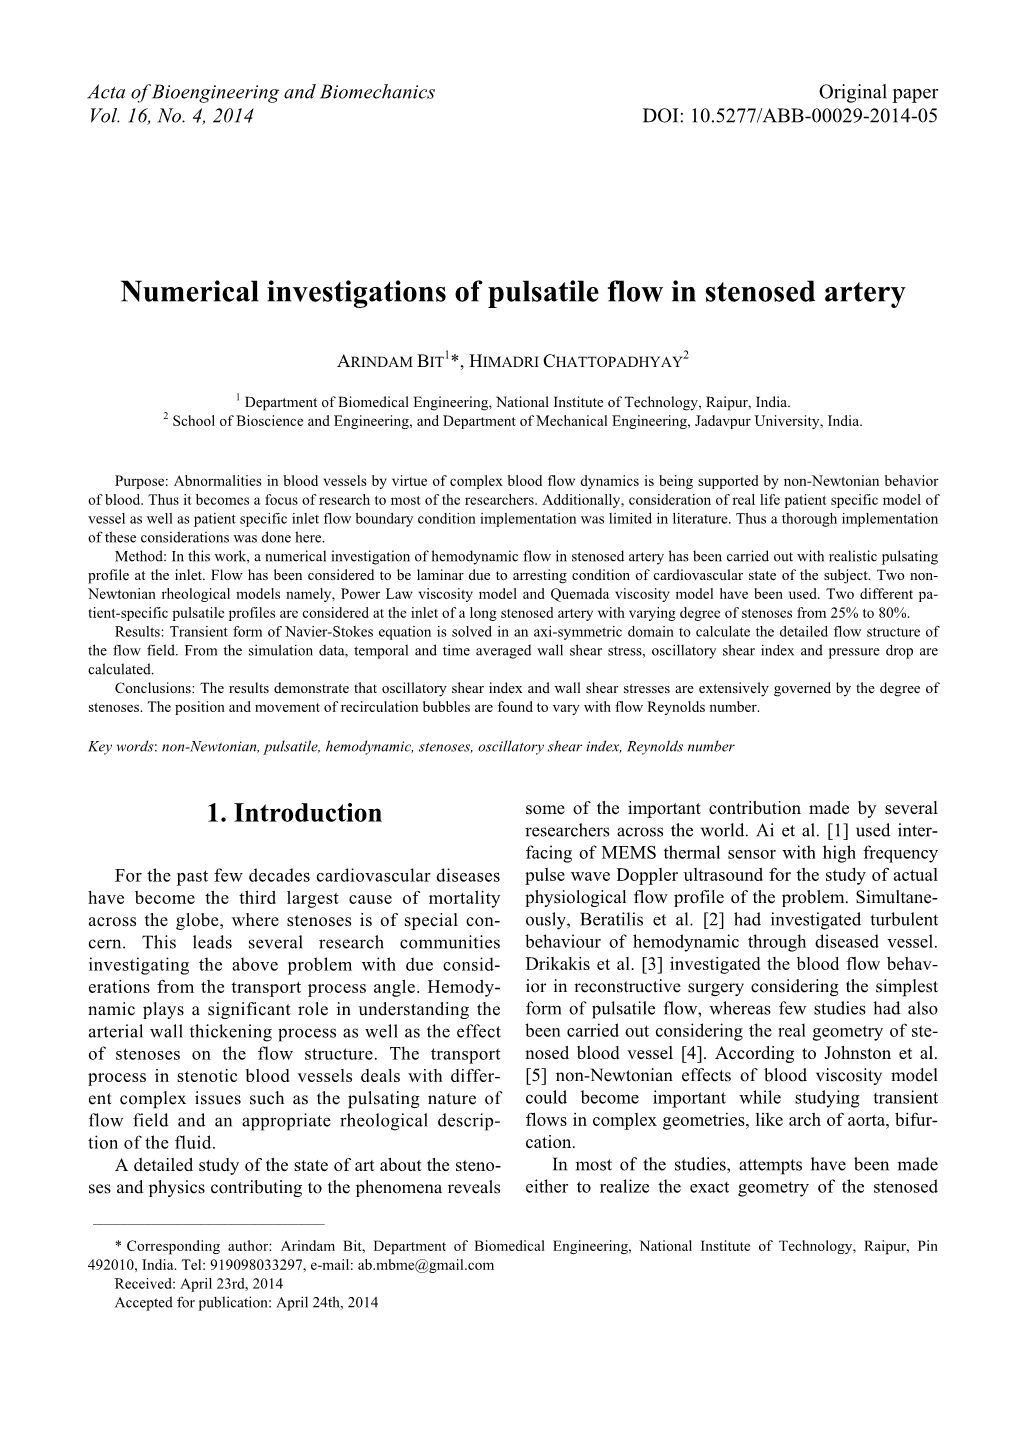 Numerical Investigations of Pulsatile Flow in Stenosed Artery